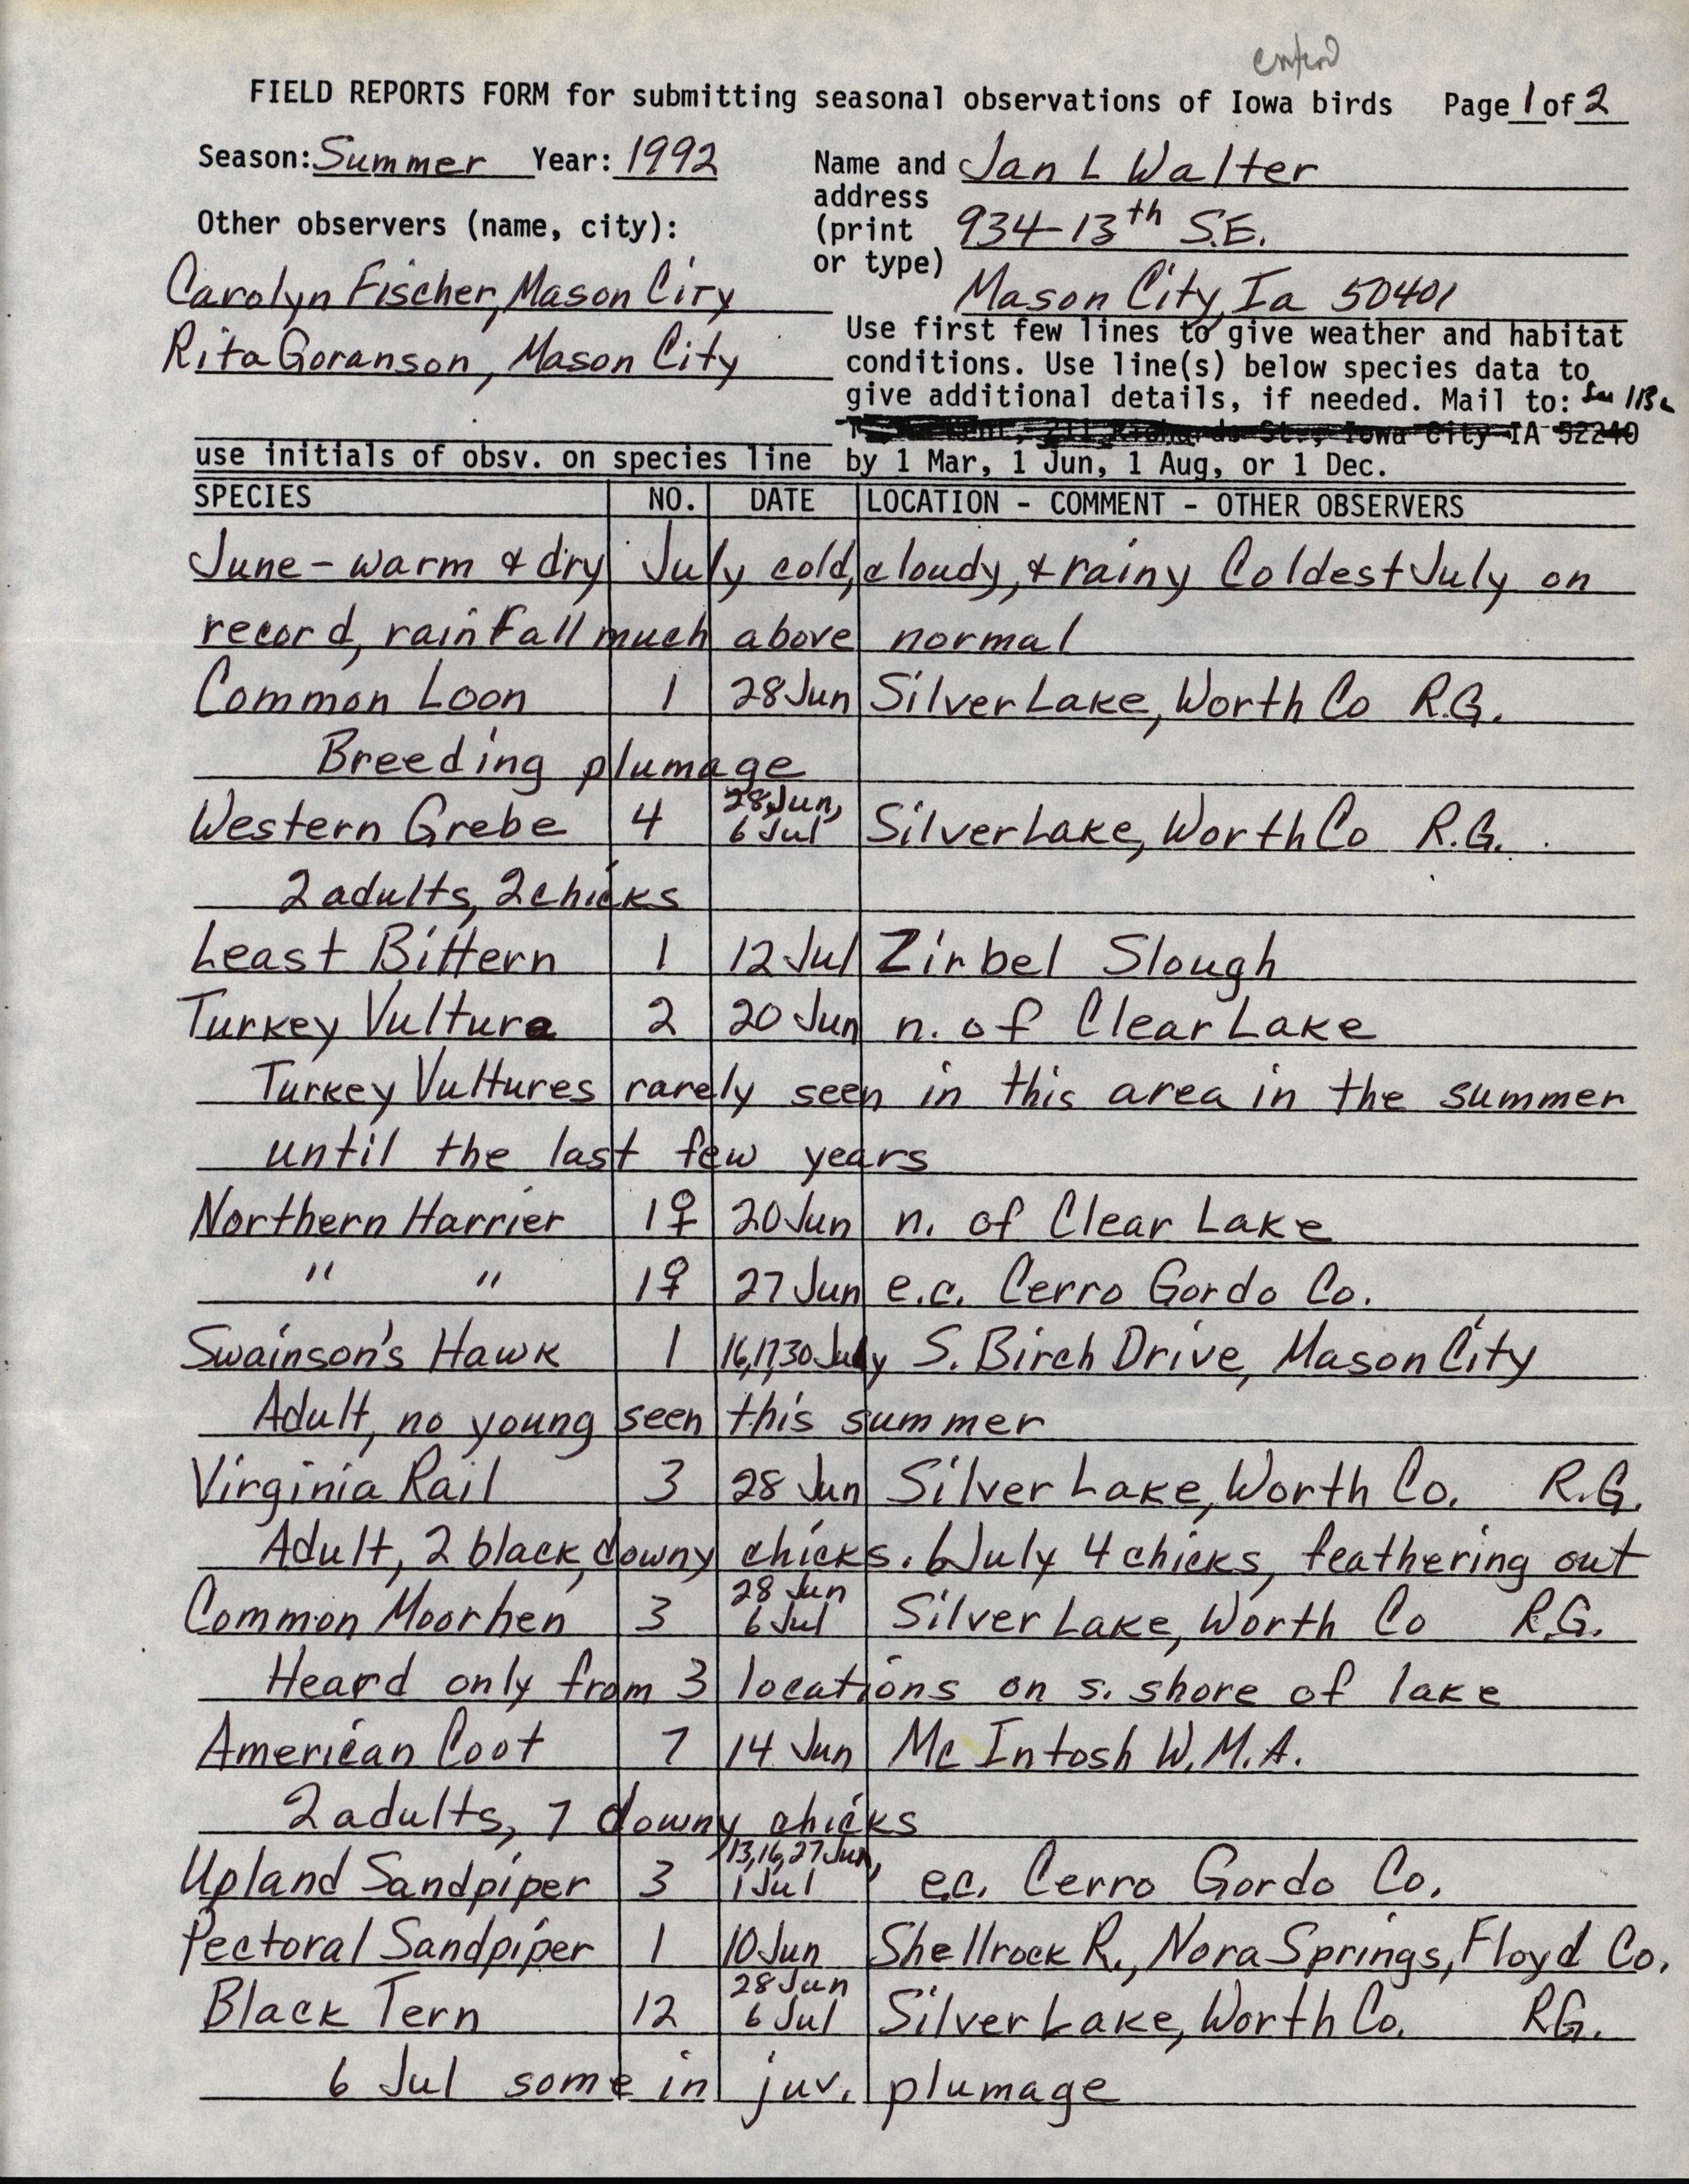 Field reports form for submitting seasonal observations of Iowa birds, Jan L. Walter, summer 1992